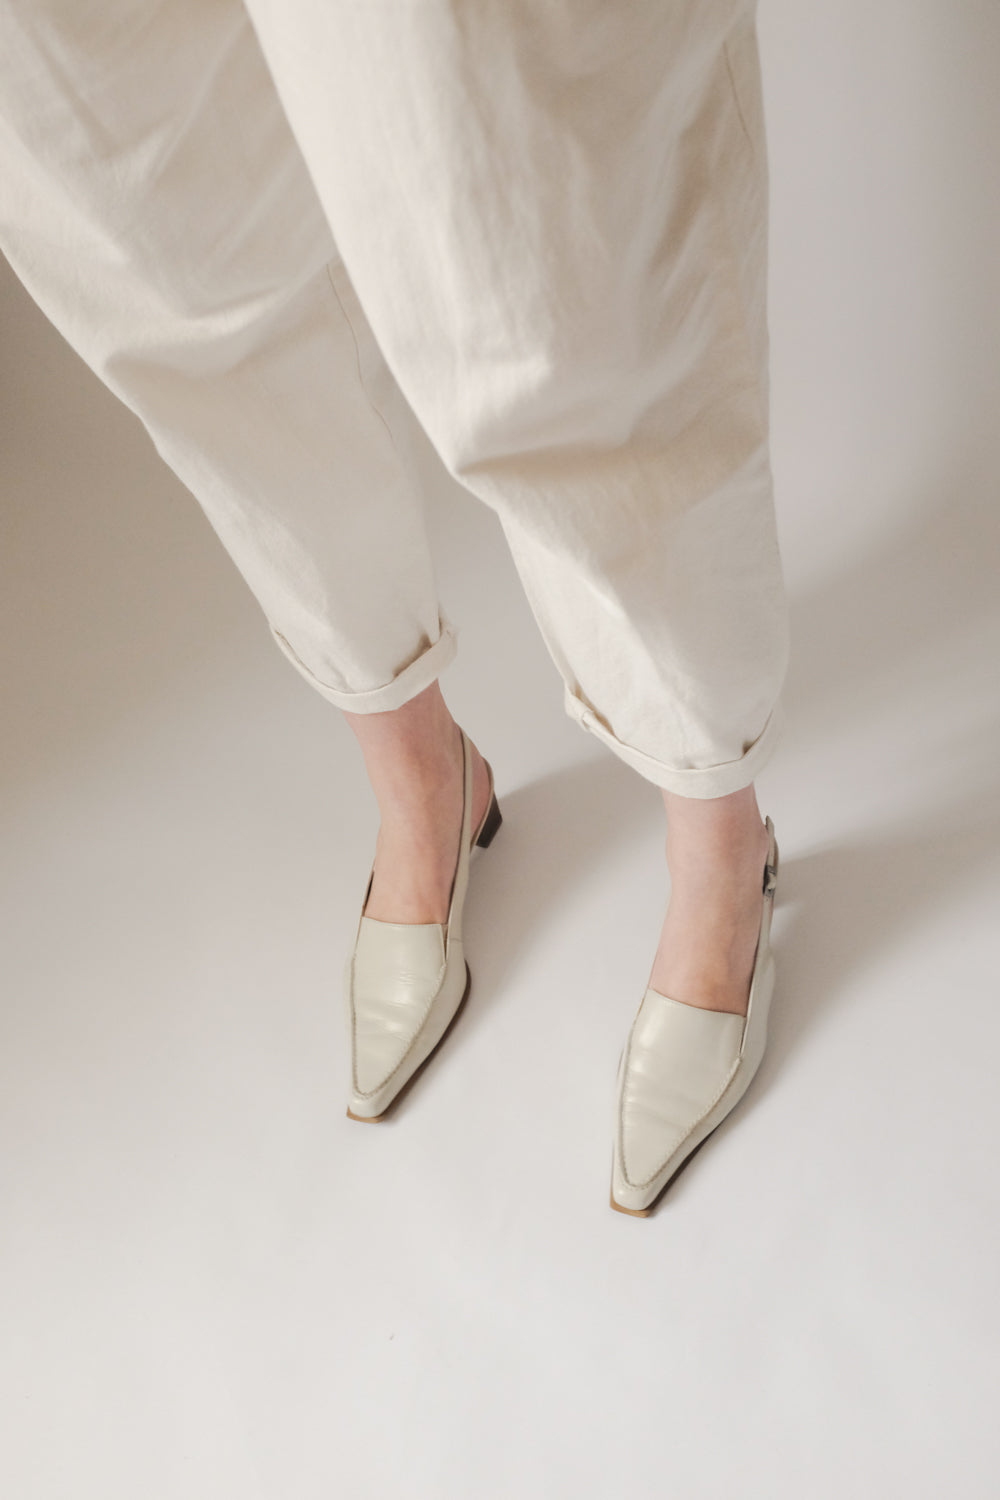 POINTY CREAM SLING BACK MULES 39 40